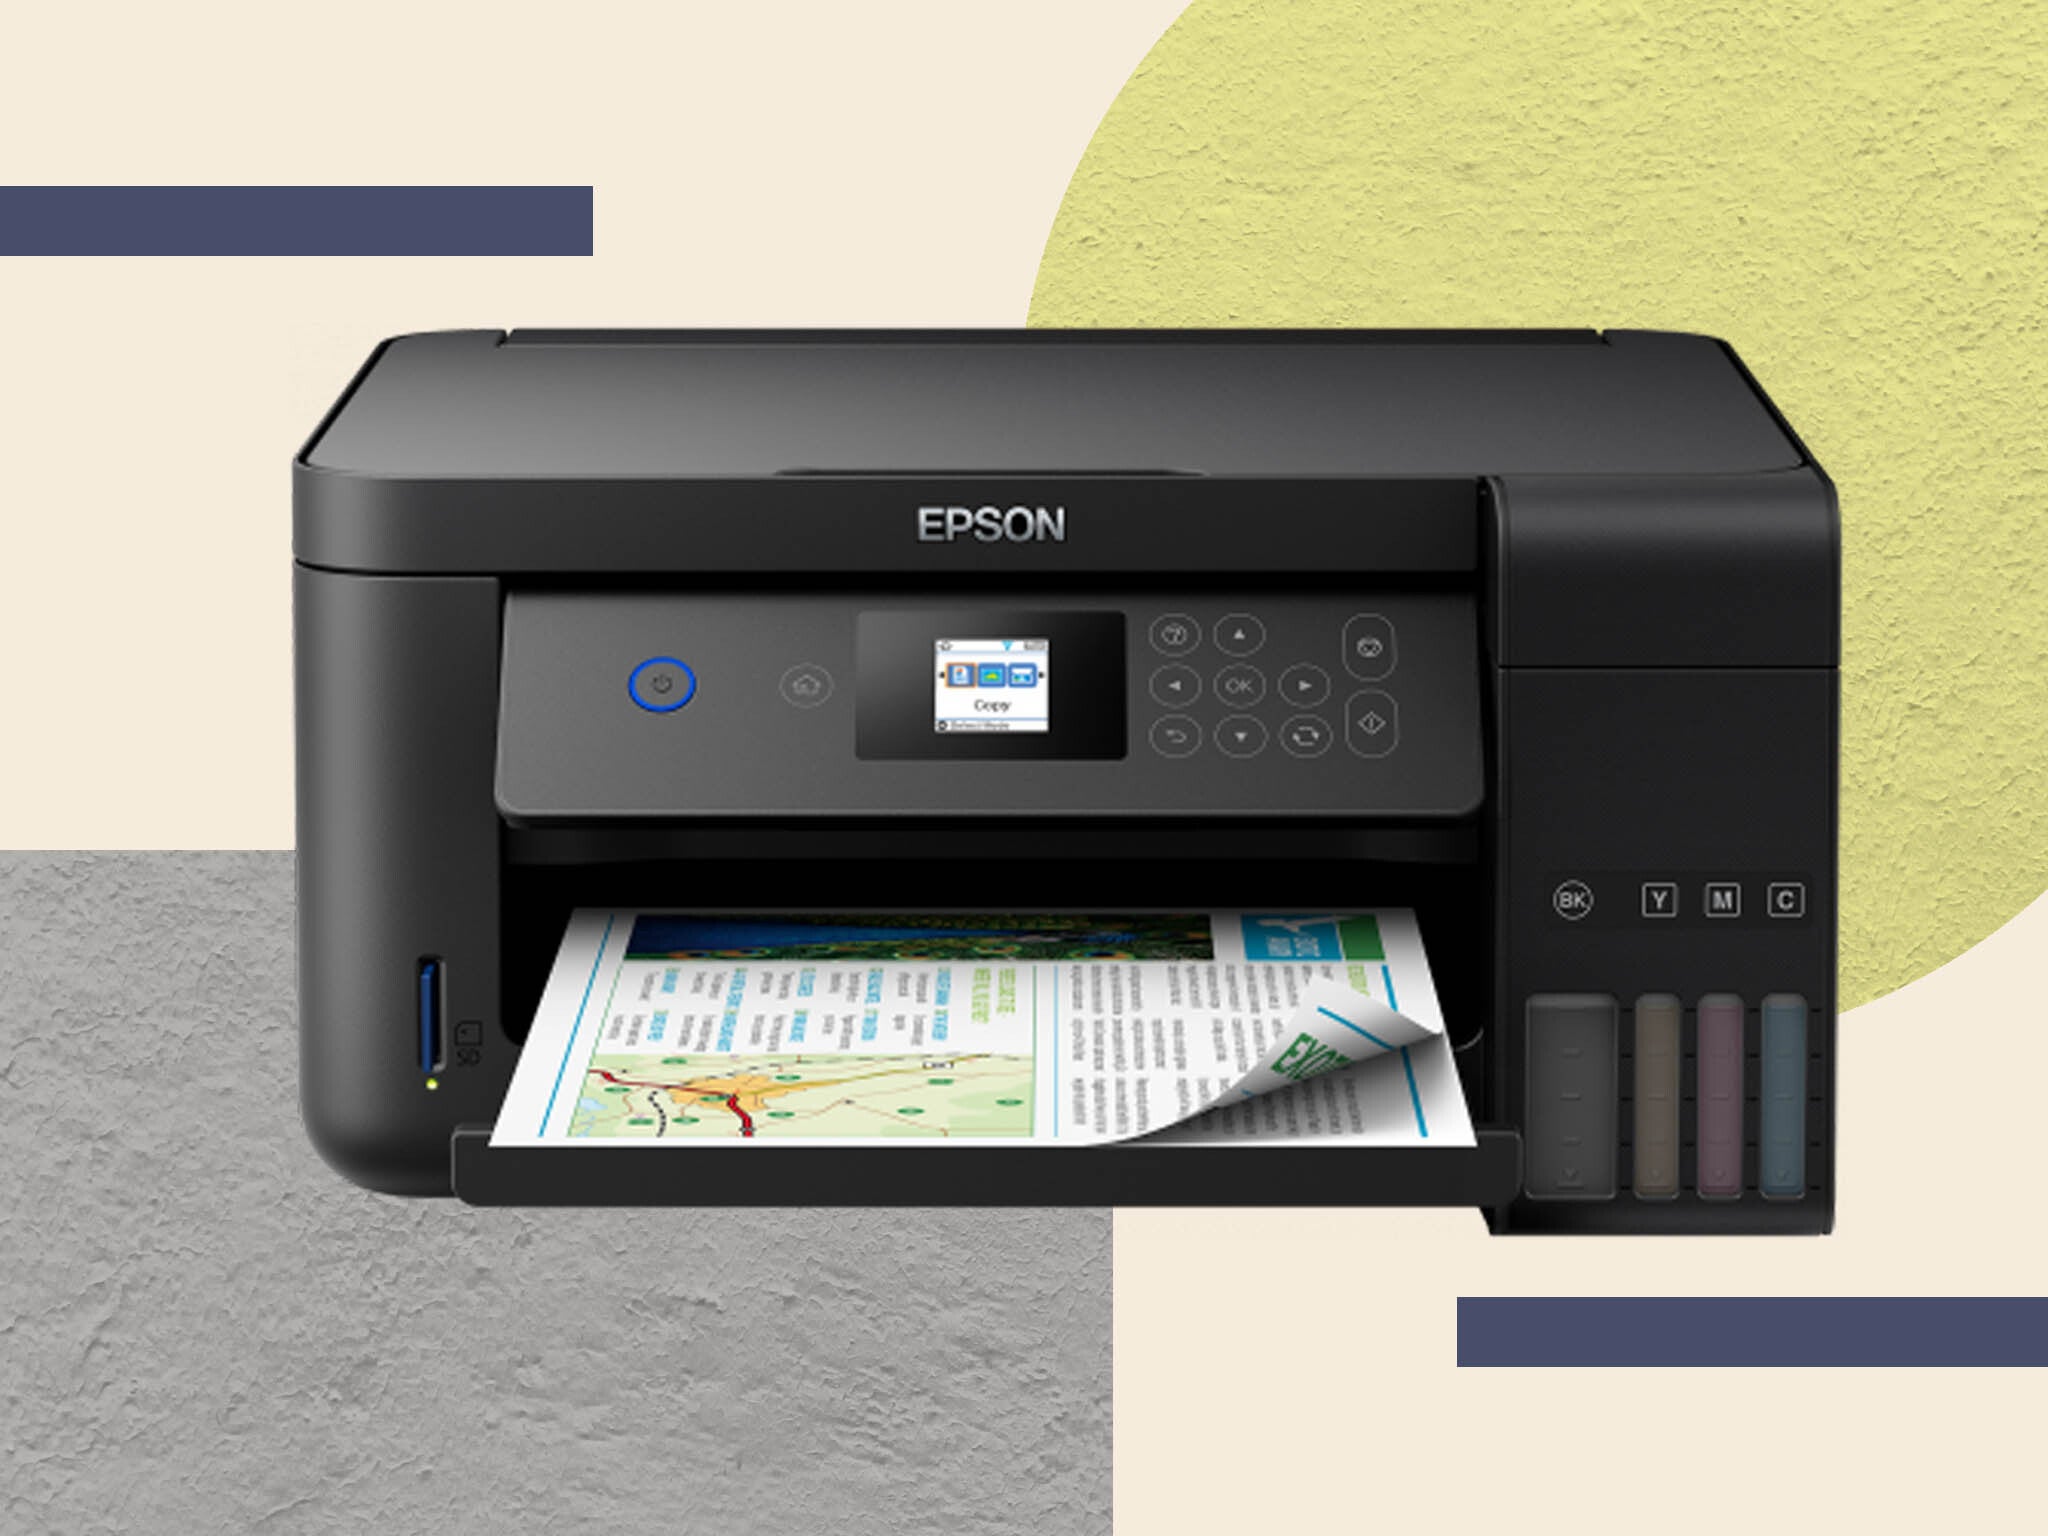 Epson says that by using tanks instead of notoriously expensive cartridges, users can save up to 90 per cent on ink cost